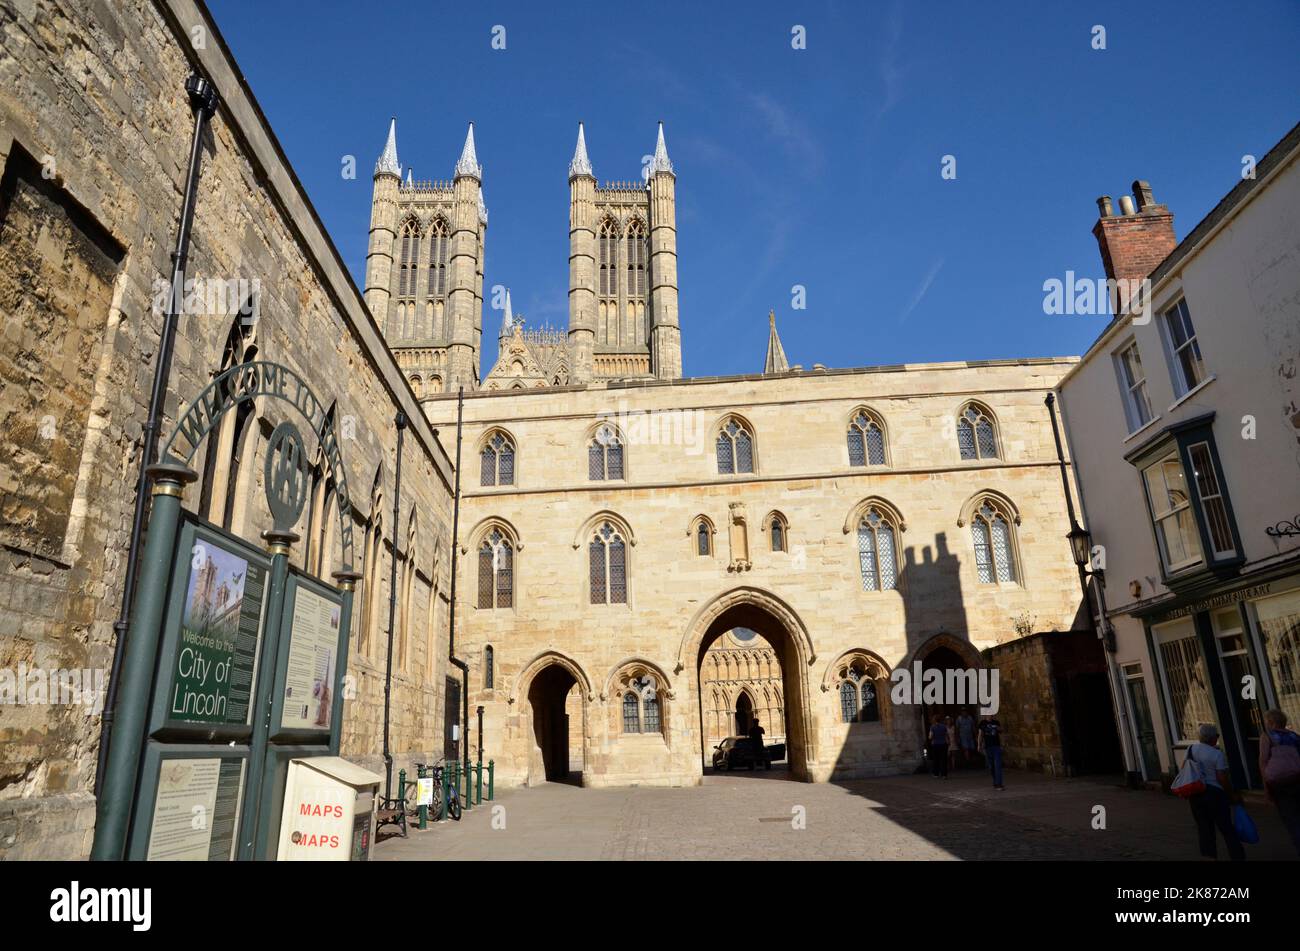 The Catherdal in Lincoln, Enlgand Stock Photo